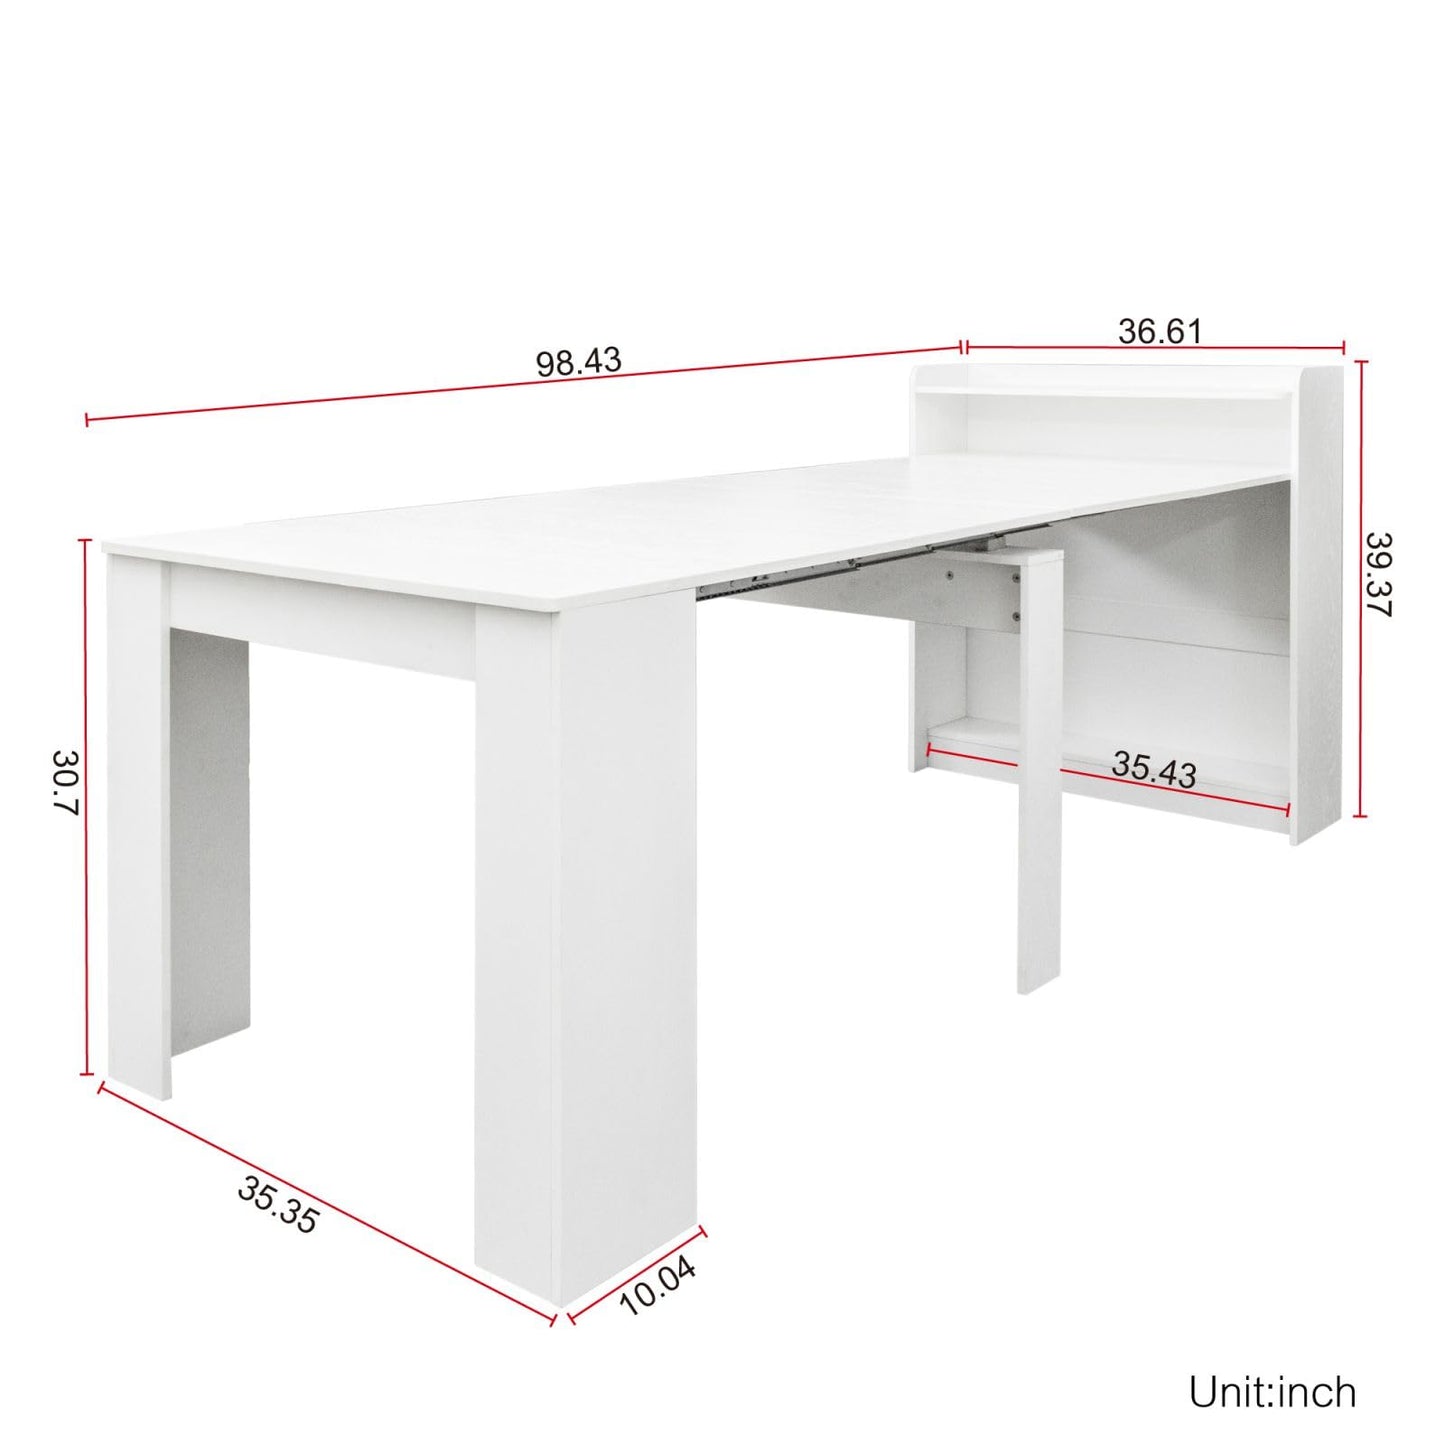 KEVINSPACE Expandable Dining Table for 6-12 Person, White Extendable Dining Room Table Wooden Kitchen Table Large Expandable Console Table Extendable from 20" to 98.43" Dining Table for Small Space